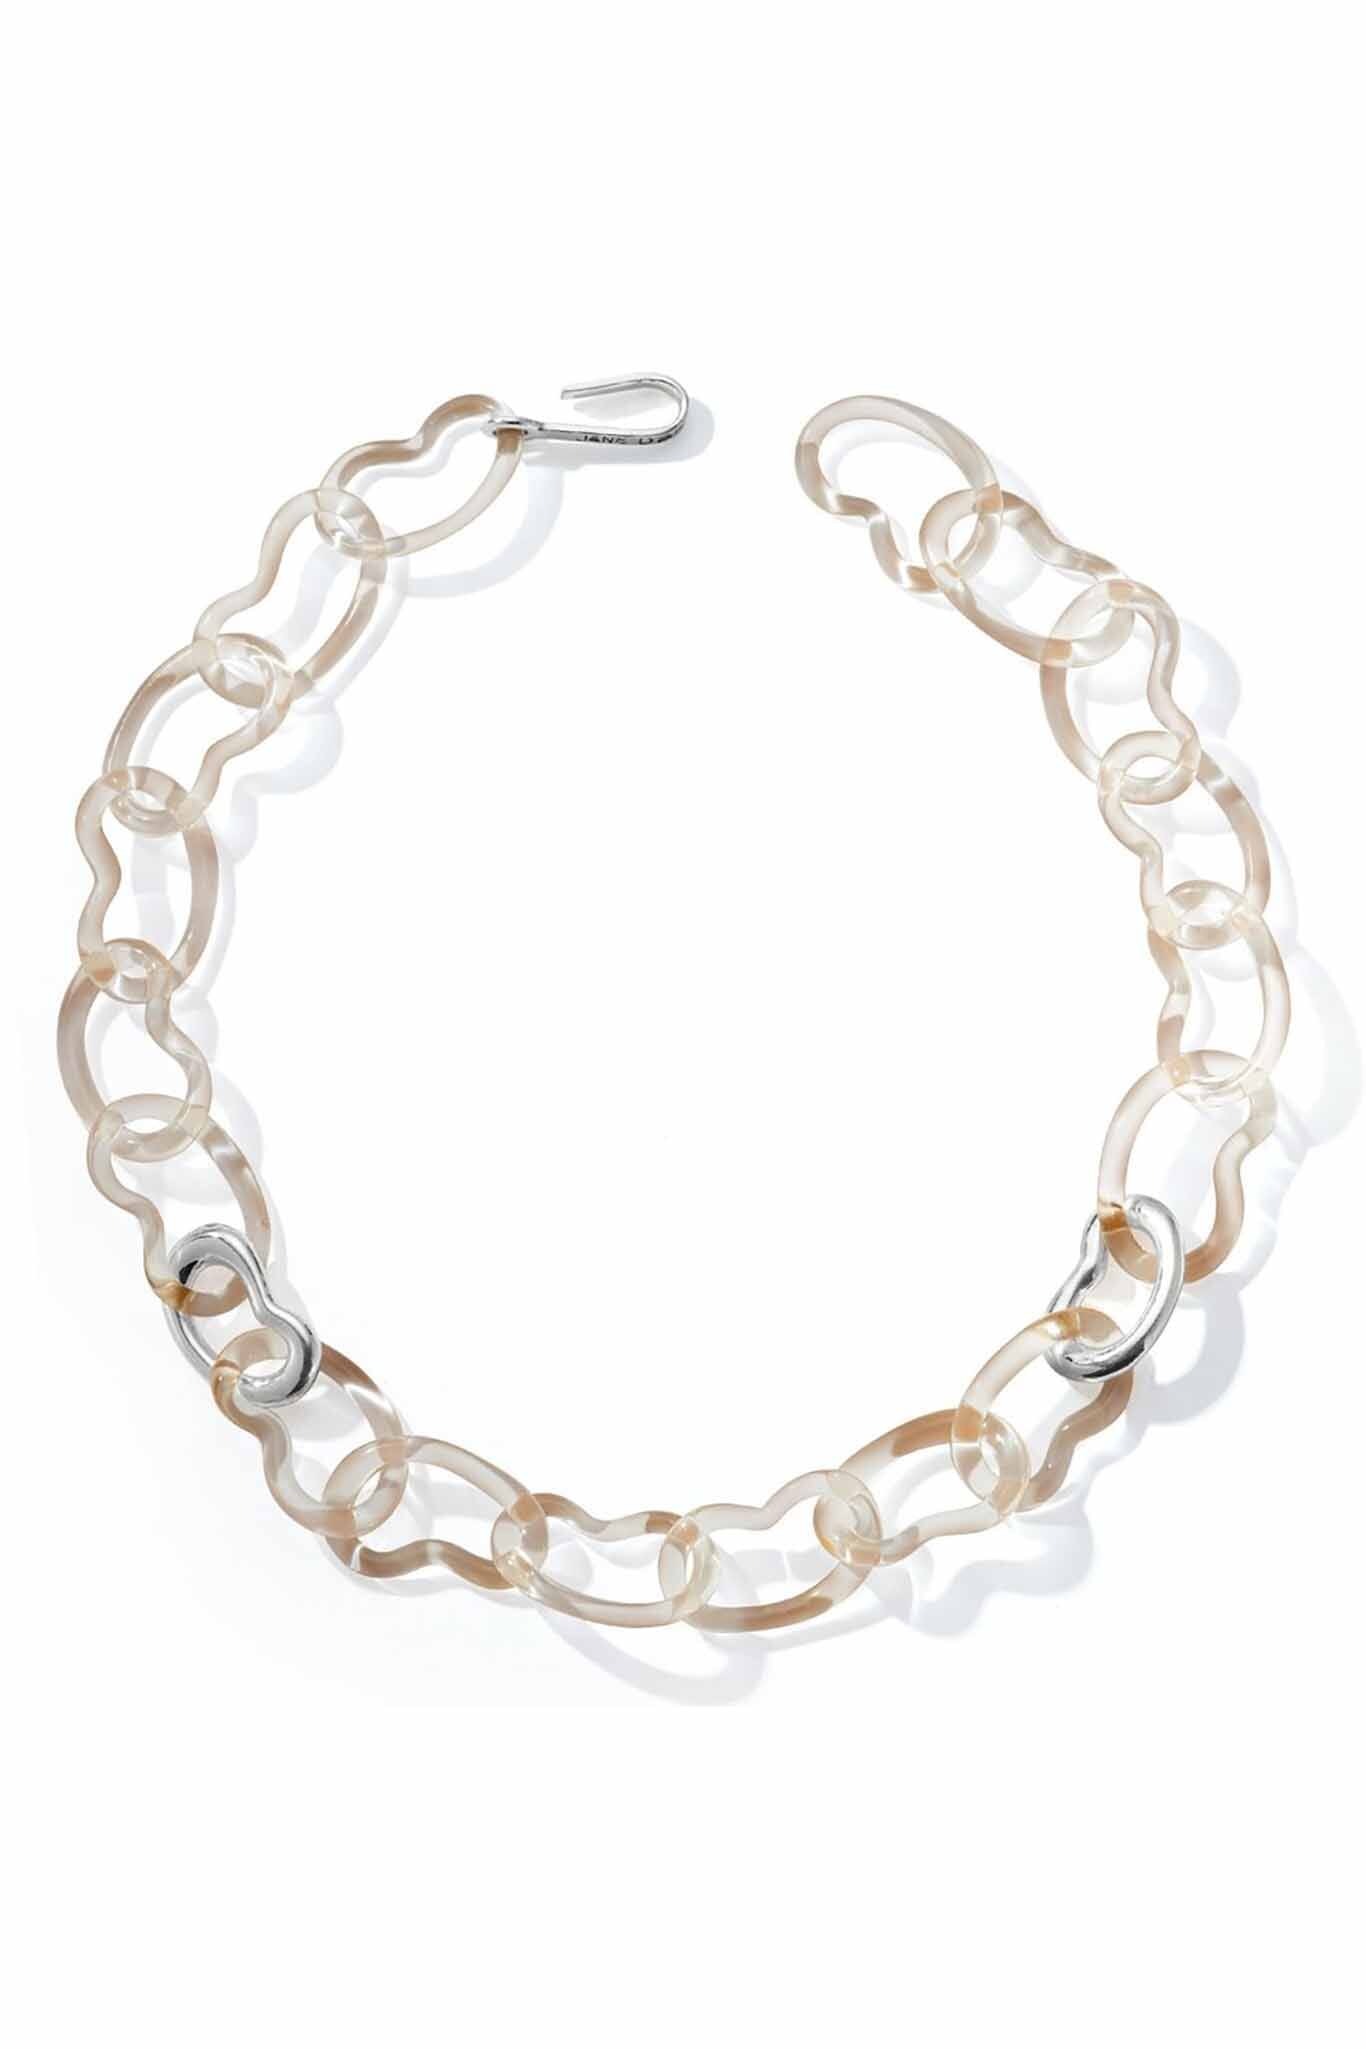 Jane D'Arensbourg Bean Necklace - Peach